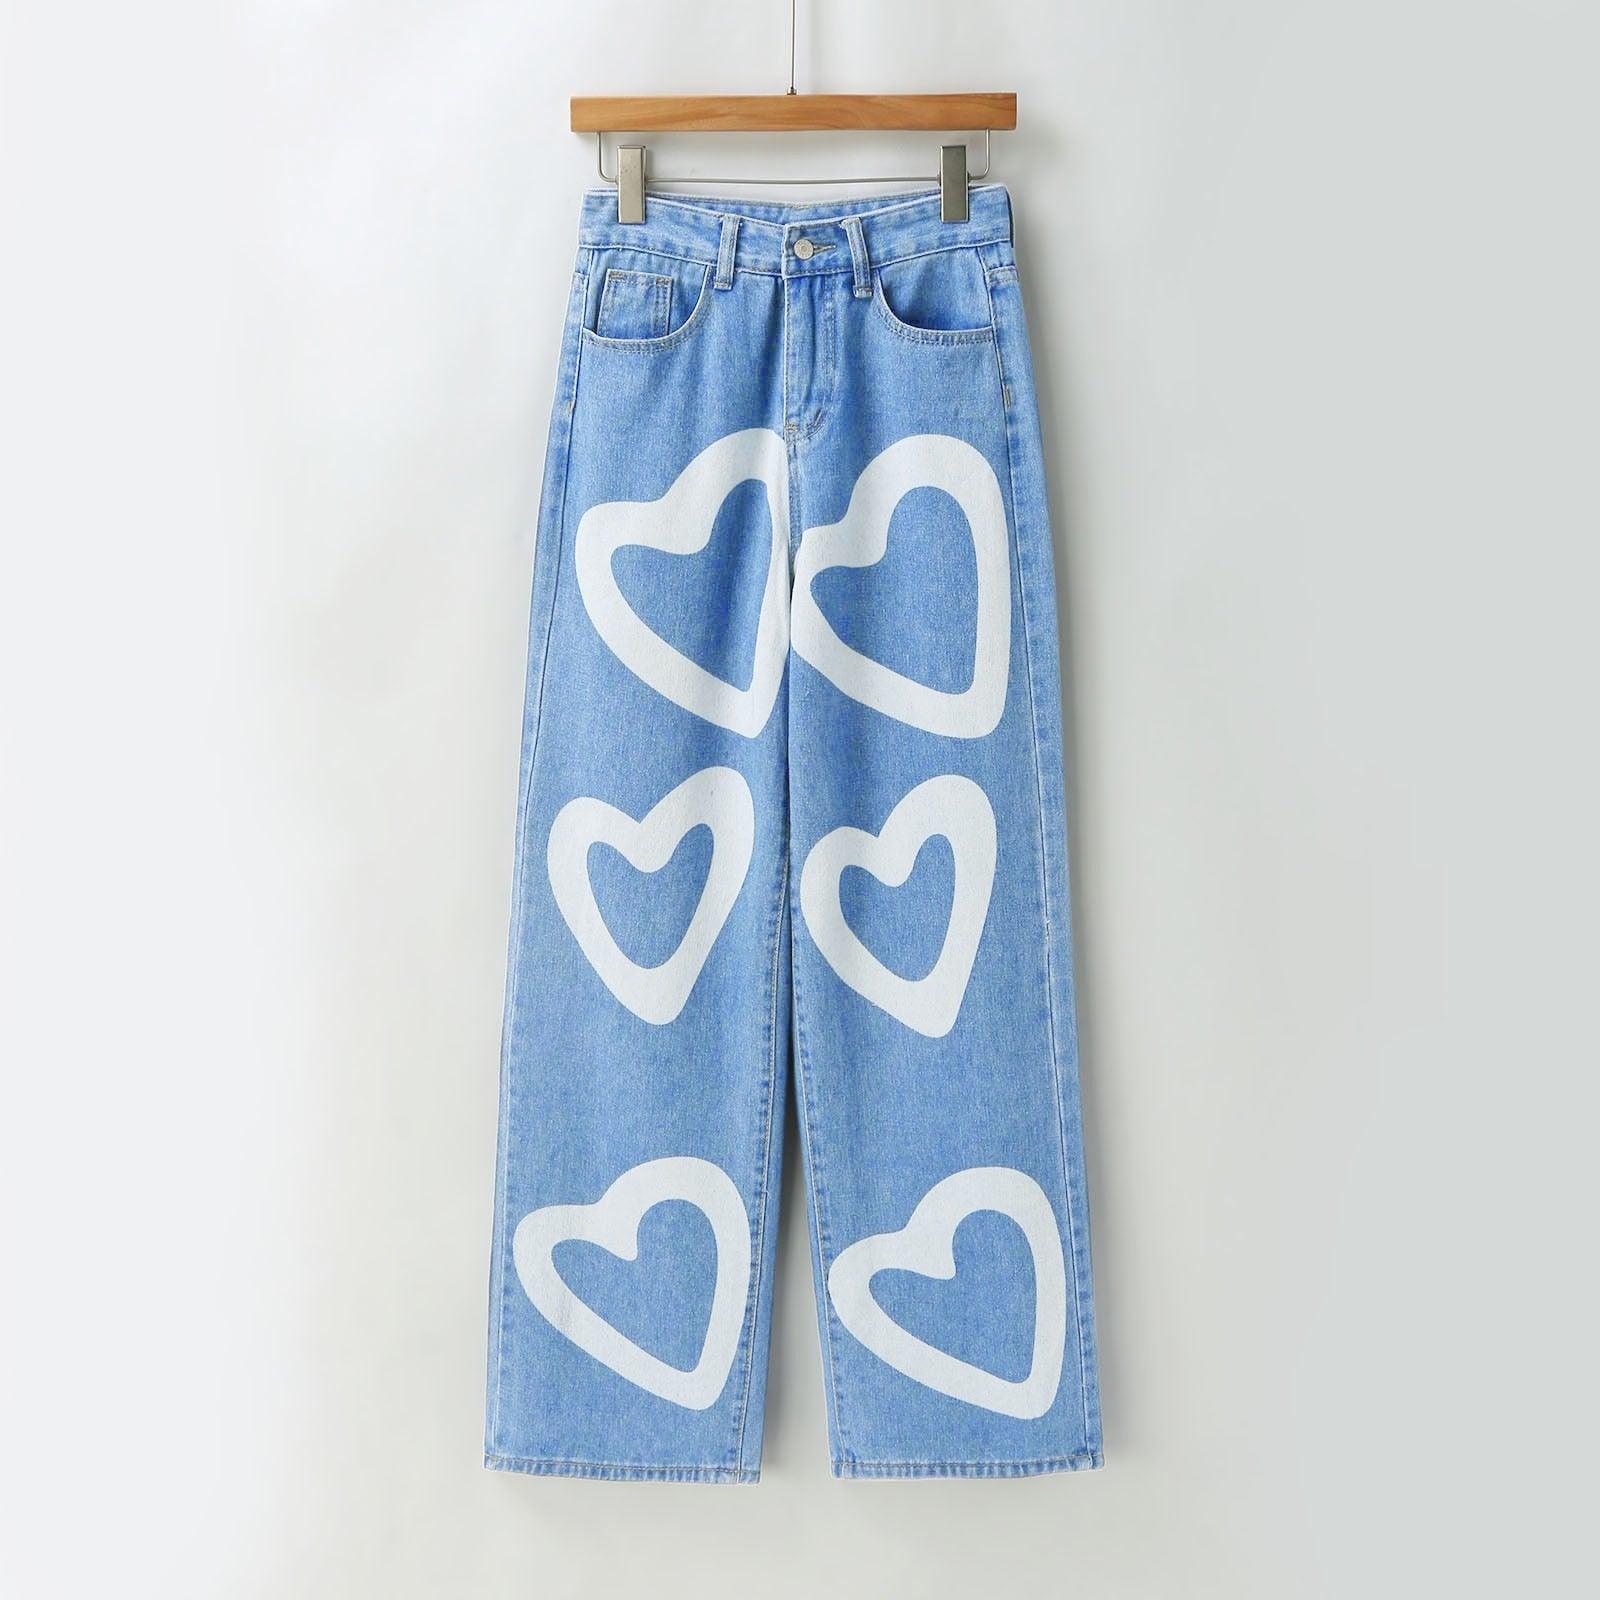 Heart Print Denim Jeans from The House of CO-KY - Pants